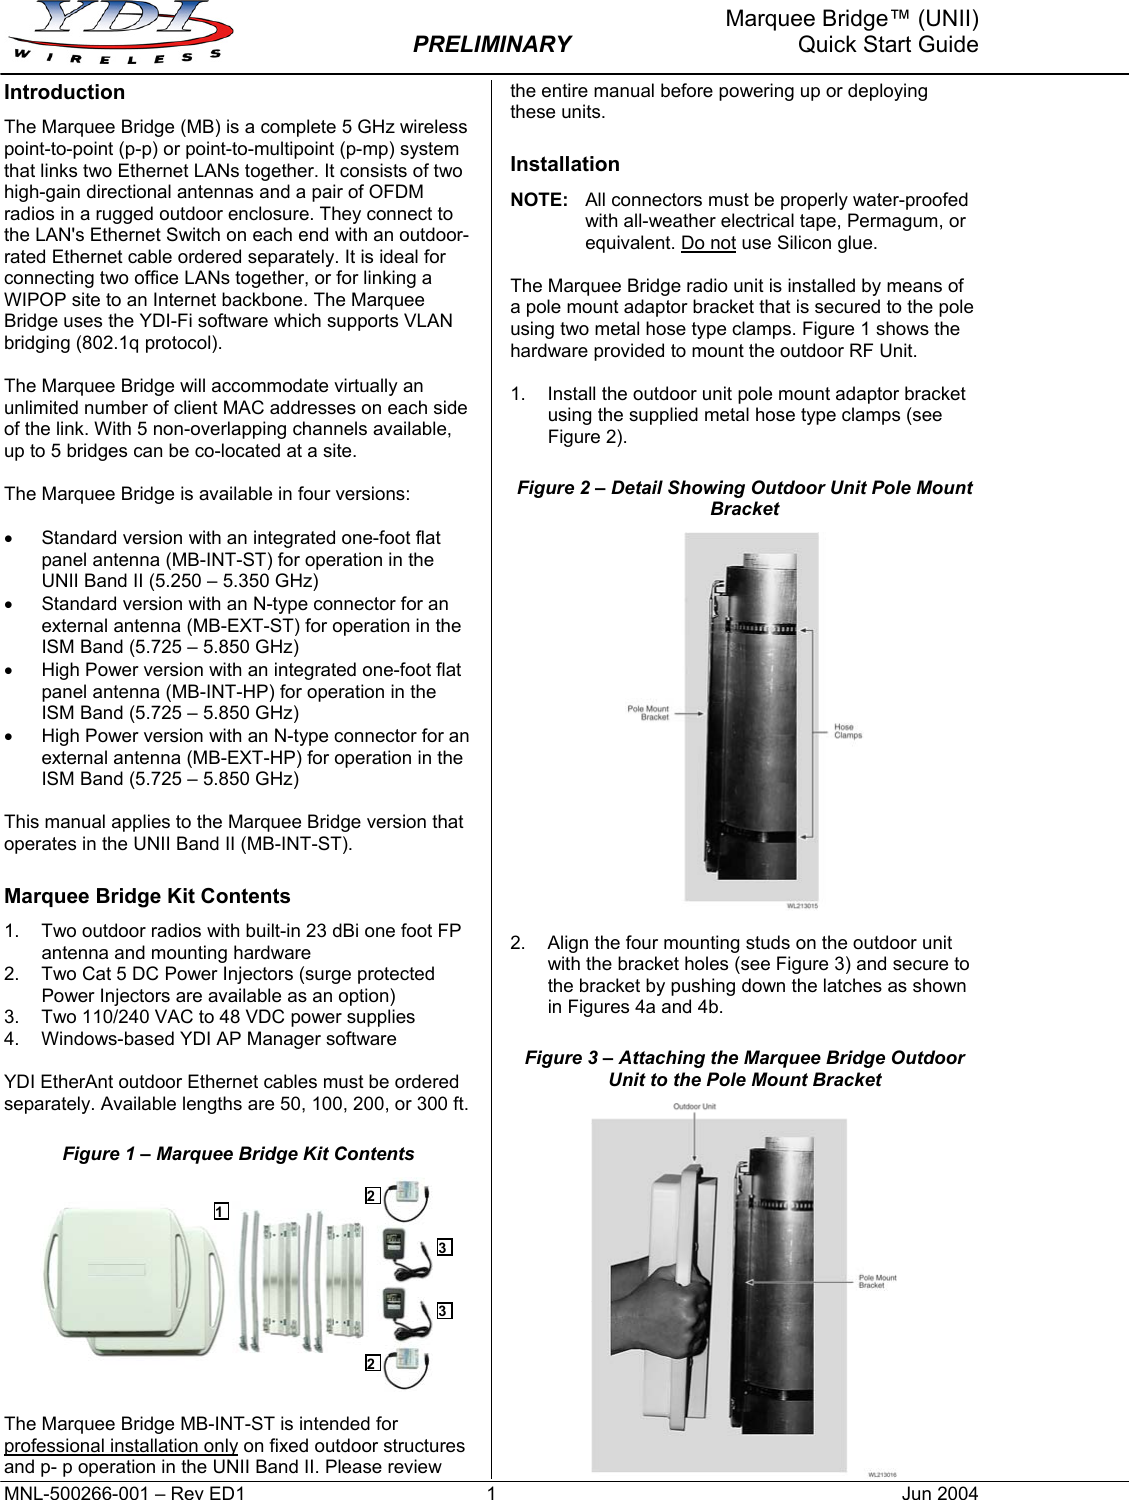     Marquee Bridge™ (UNII)  PRELIMINARY  Quick Start Guide Introduction The Marquee Bridge (MB) is a complete 5 GHz wireless point-to-point (p-p) or point-to-multipoint (p-mp) system that links two Ethernet LANs together. It consists of two high-gain directional antennas and a pair of OFDM radios in a rugged outdoor enclosure. They connect to the LAN&apos;s Ethernet Switch on each end with an outdoor-rated Ethernet cable ordered separately. It is ideal for connecting two office LANs together, or for linking a WIPOP site to an Internet backbone. The Marquee Bridge uses the YDI-Fi software which supports VLAN bridging (802.1q protocol).  The Marquee Bridge will accommodate virtually an unlimited number of client MAC addresses on each side of the link. With 5 non-overlapping channels available, up to 5 bridges can be co-located at a site.  The Marquee Bridge is available in four versions:  •  Standard version with an integrated one-foot flat panel antenna (MB-INT-ST) for operation in the UNII Band II (5.250 – 5.350 GHz) •  Standard version with an N-type connector for an external antenna (MB-EXT-ST) for operation in the ISM Band (5.725 – 5.850 GHz) •  High Power version with an integrated one-foot flat panel antenna (MB-INT-HP) for operation in the ISM Band (5.725 – 5.850 GHz) •  High Power version with an N-type connector for an external antenna (MB-EXT-HP) for operation in the ISM Band (5.725 – 5.850 GHz)  This manual applies to the Marquee Bridge version that operates in the UNII Band II (MB-INT-ST). Marquee Bridge Kit Contents 1.  Two outdoor radios with built-in 23 dBi one foot FP antenna and mounting hardware 2.  Two Cat 5 DC Power Injectors (surge protected Power Injectors are available as an option) 3.  Two 110/240 VAC to 48 VDC power supplies 4.  Windows-based YDI AP Manager software  YDI EtherAnt outdoor Ethernet cables must be ordered separately. Available lengths are 50, 100, 200, or 300 ft. Figure 1 – Marquee Bridge Kit Contents   The Marquee Bridge MB-INT-ST is intended for professional installation only on fixed outdoor structures and p- p operation in the UNII Band II. Please review the entire manual before powering up or deploying these units. Installation NOTE:  All connectors must be properly water-proofed with all-weather electrical tape, Permagum, or equivalent. Do not use Silicon glue.  The Marquee Bridge radio unit is installed by means of a pole mount adaptor bracket that is secured to the pole using two metal hose type clamps. Figure 1 shows the hardware provided to mount the outdoor RF Unit.  1.  Install the outdoor unit pole mount adaptor bracket using the supplied metal hose type clamps (see Figure 2). Figure 2 – Detail Showing Outdoor Unit Pole Mount Bracket   2.  Align the four mounting studs on the outdoor unit with the bracket holes (see Figure 3) and secure to the bracket by pushing down the latches as shown in Figures 4a and 4b. Figure 3 – Attaching the Marquee Bridge Outdoor Unit to the Pole Mount Bracket  21 332MNL-500266-001 – Rev ED1  1  Jun 2004 